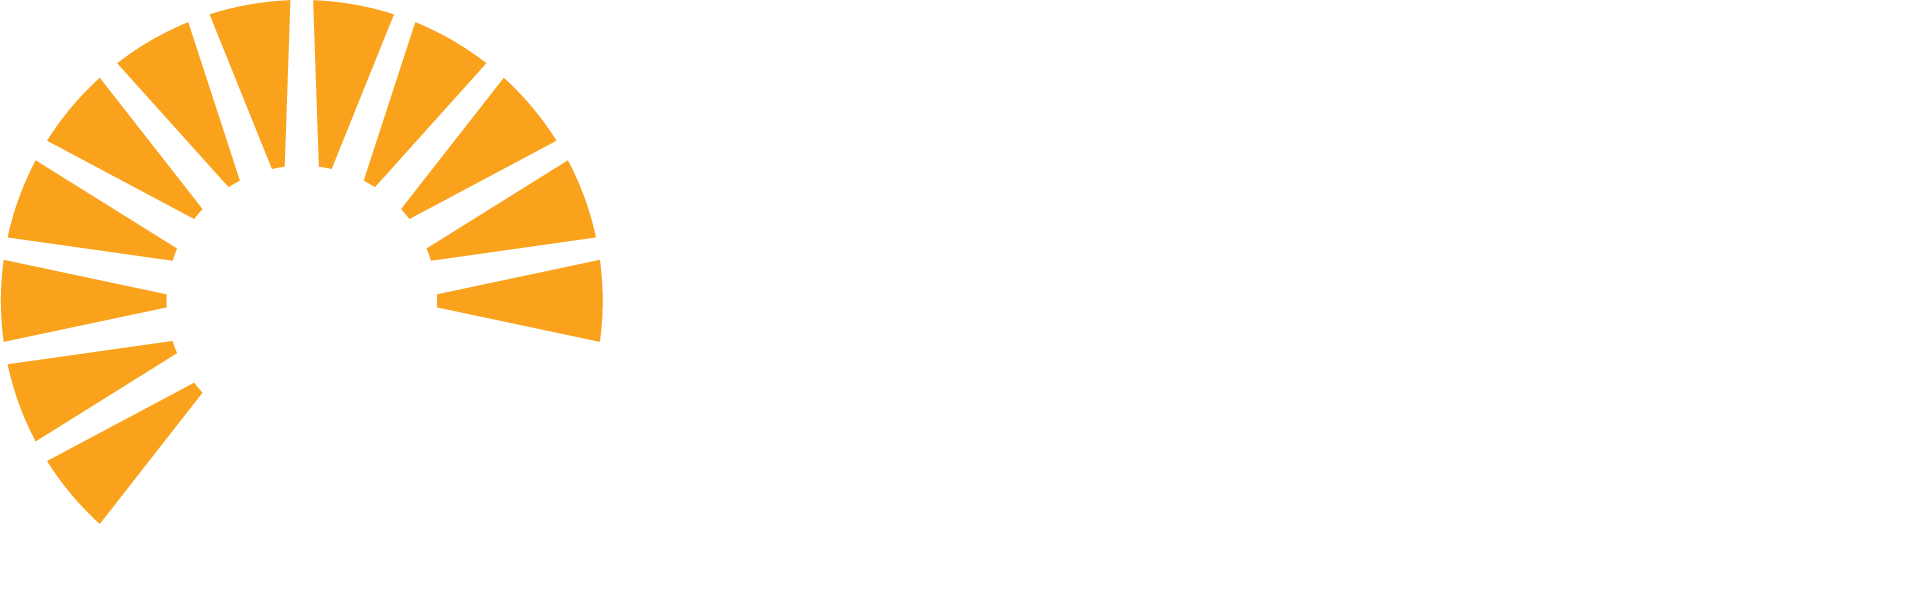 SunShower Learning logo in white and yellow